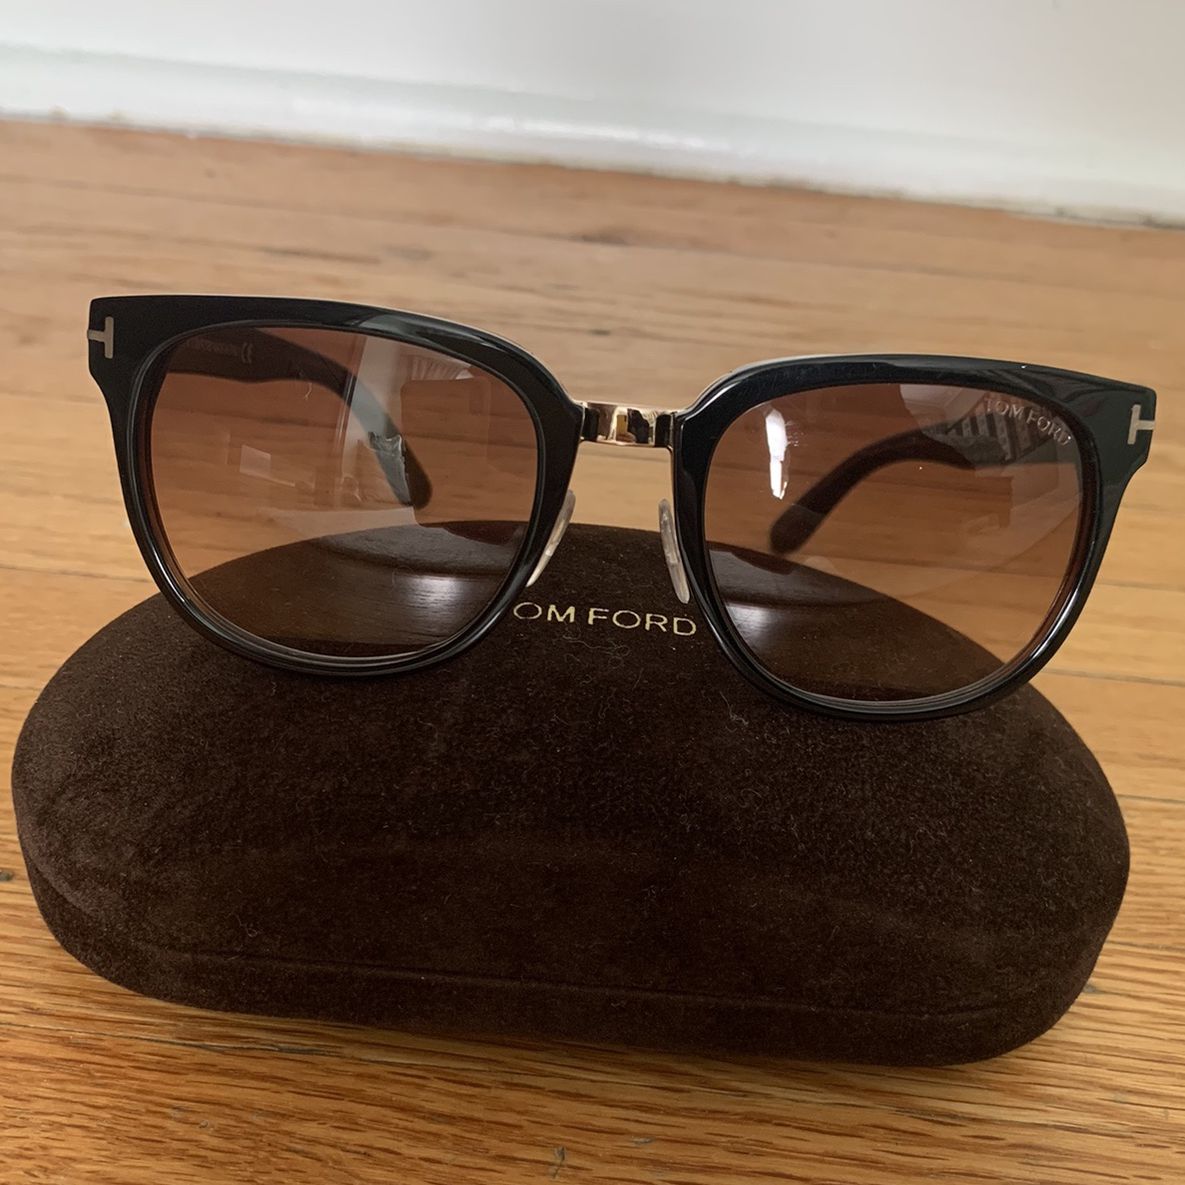 Tom Ford Sunglasses TF 290 for Sale in Ind Head Park, IL - OfferUp